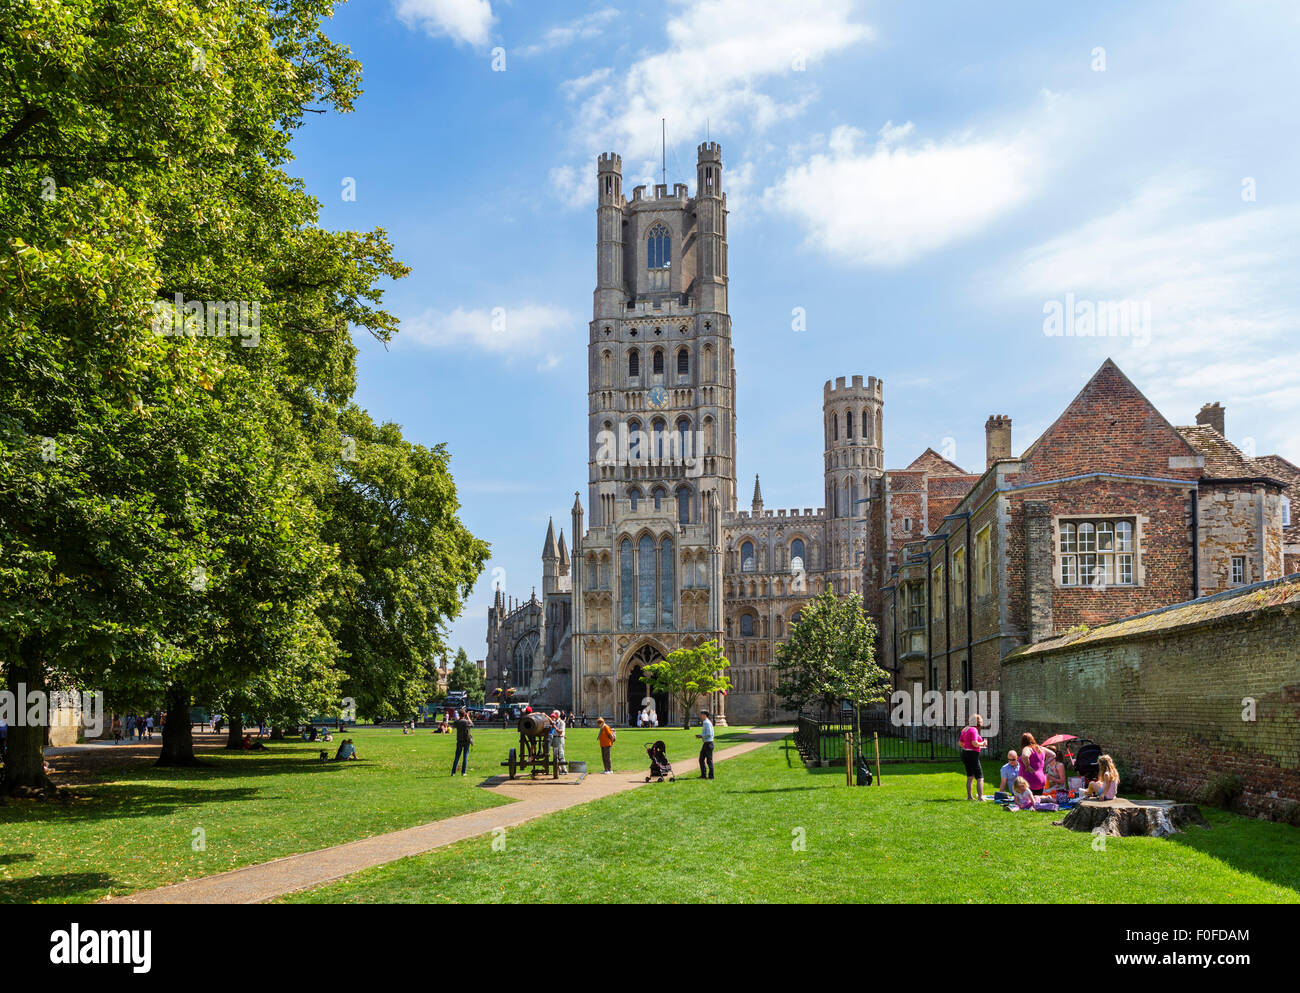 Ely Cathedral from Palace Green, Ely, Cambridgeshire, England, UK Stock Photo